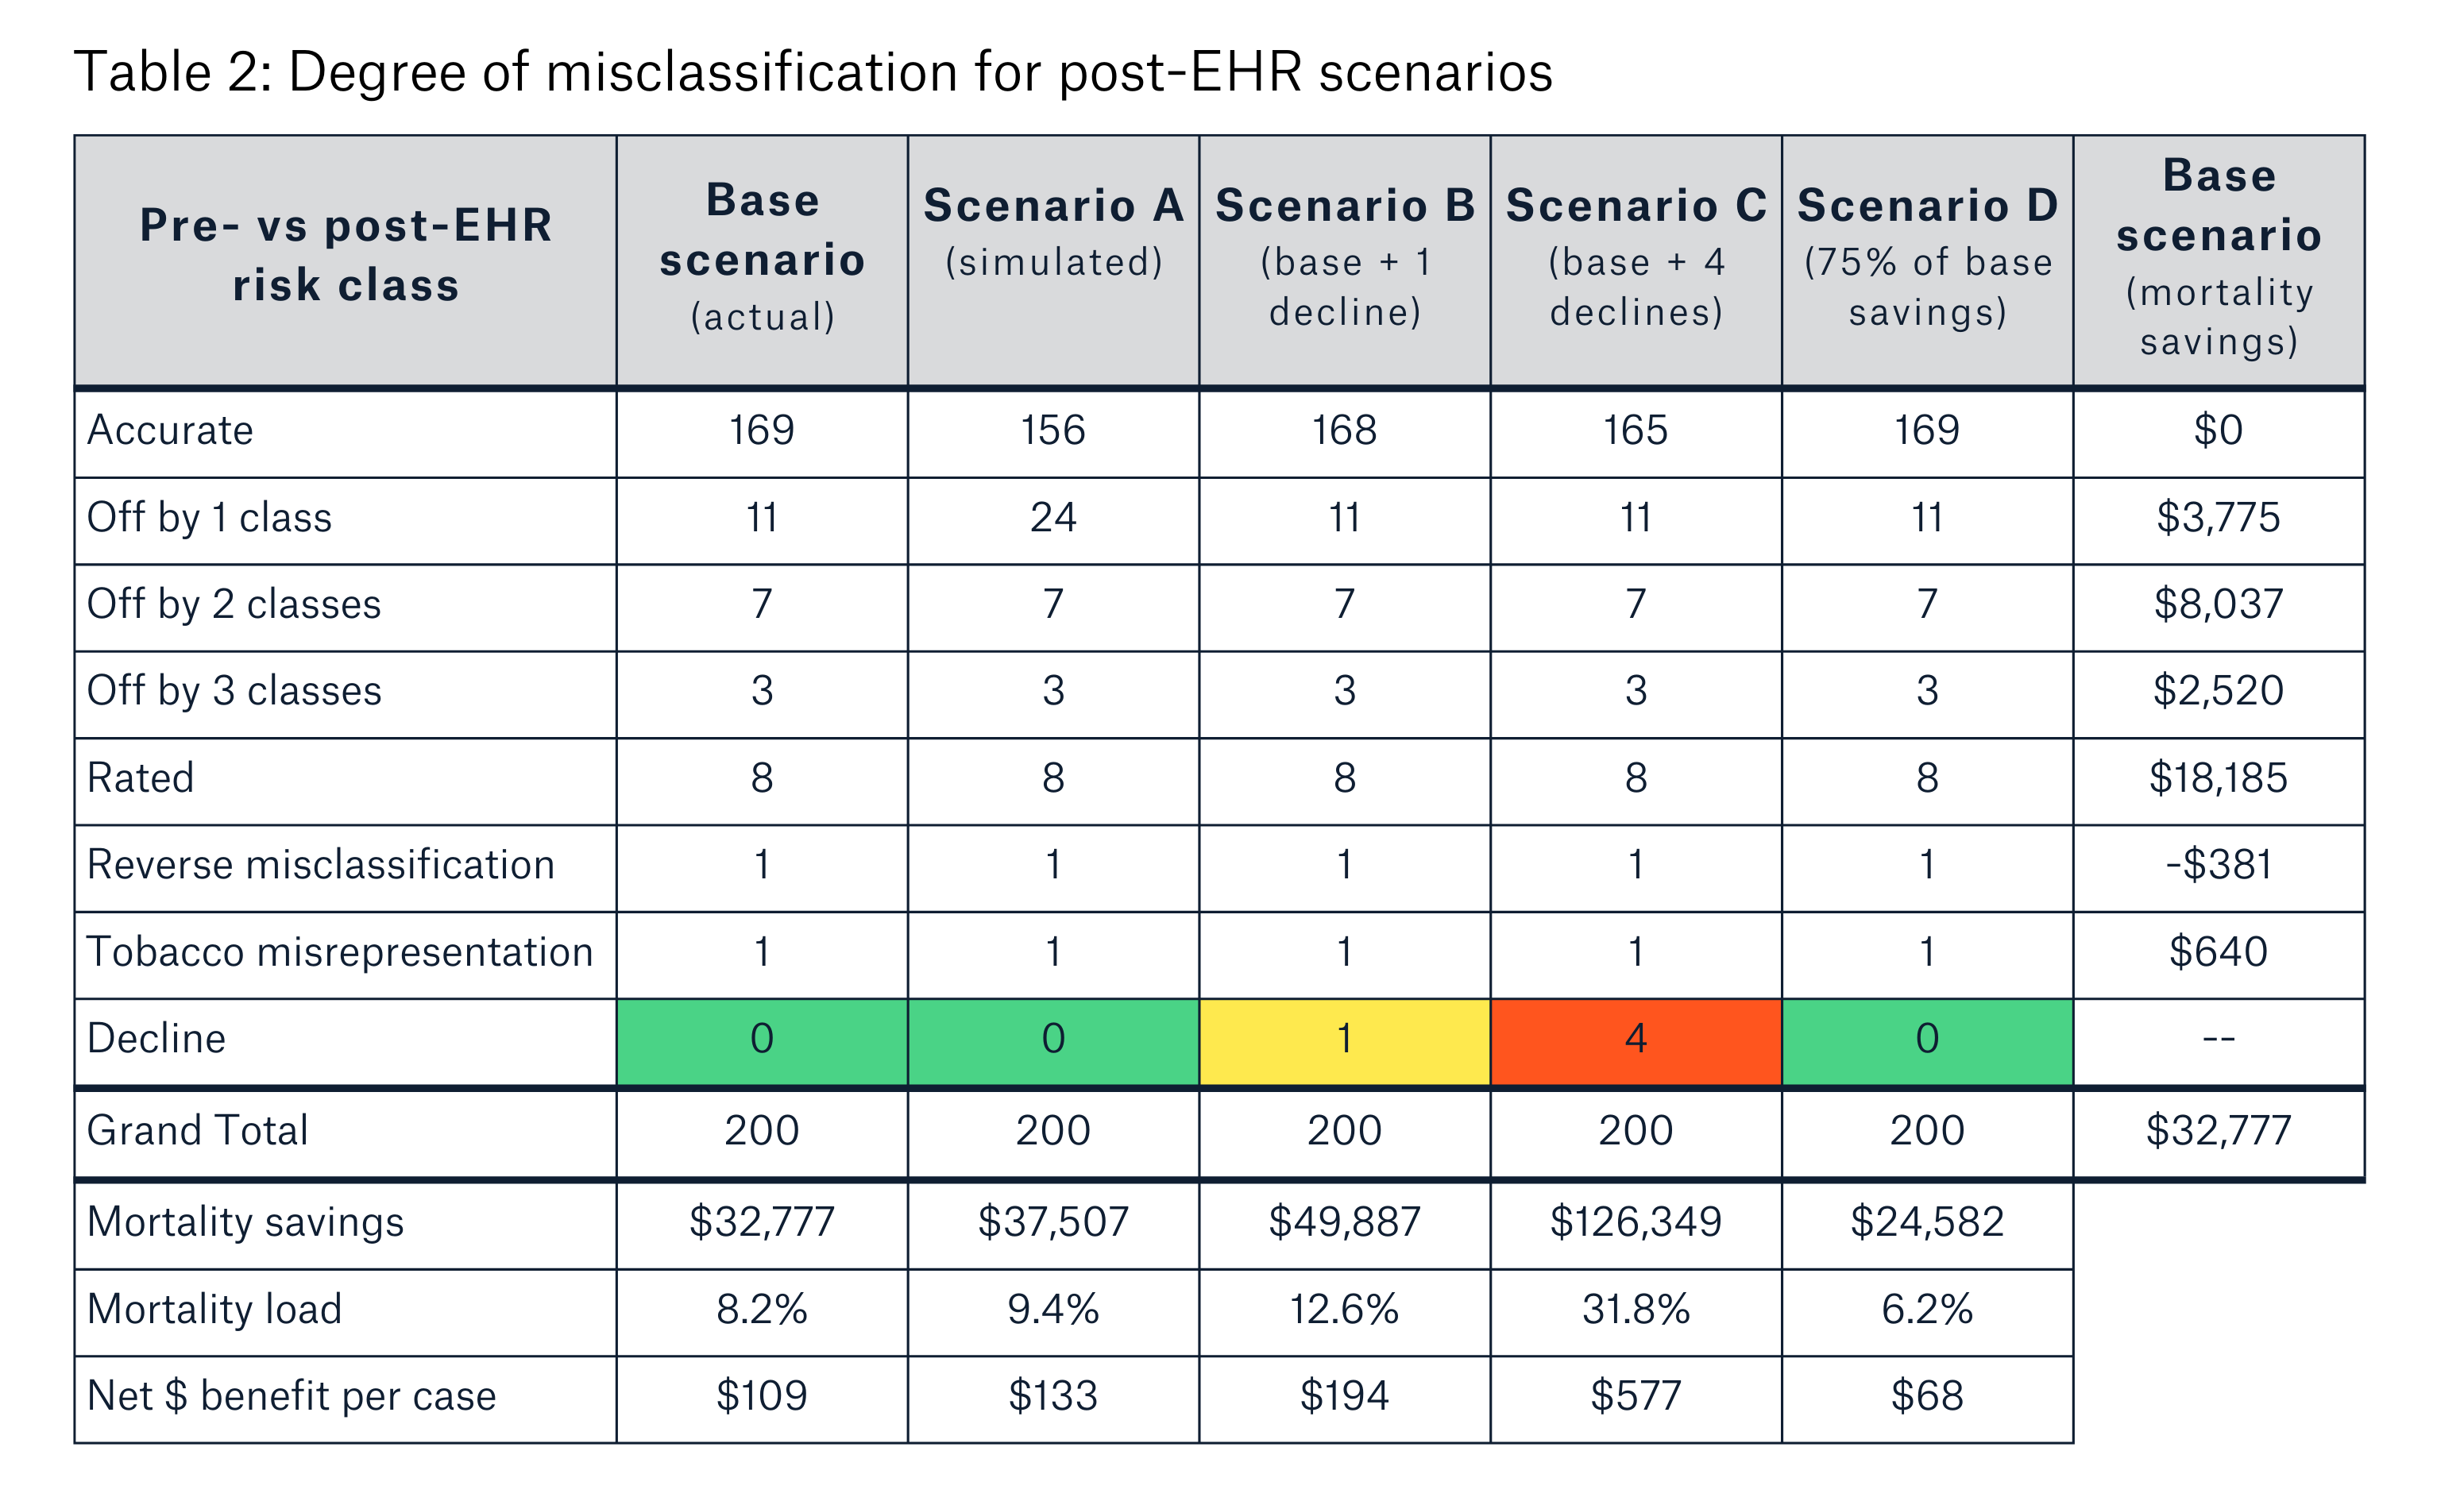 Graphic table showing the degree of misclassification for post EHR scenarios.